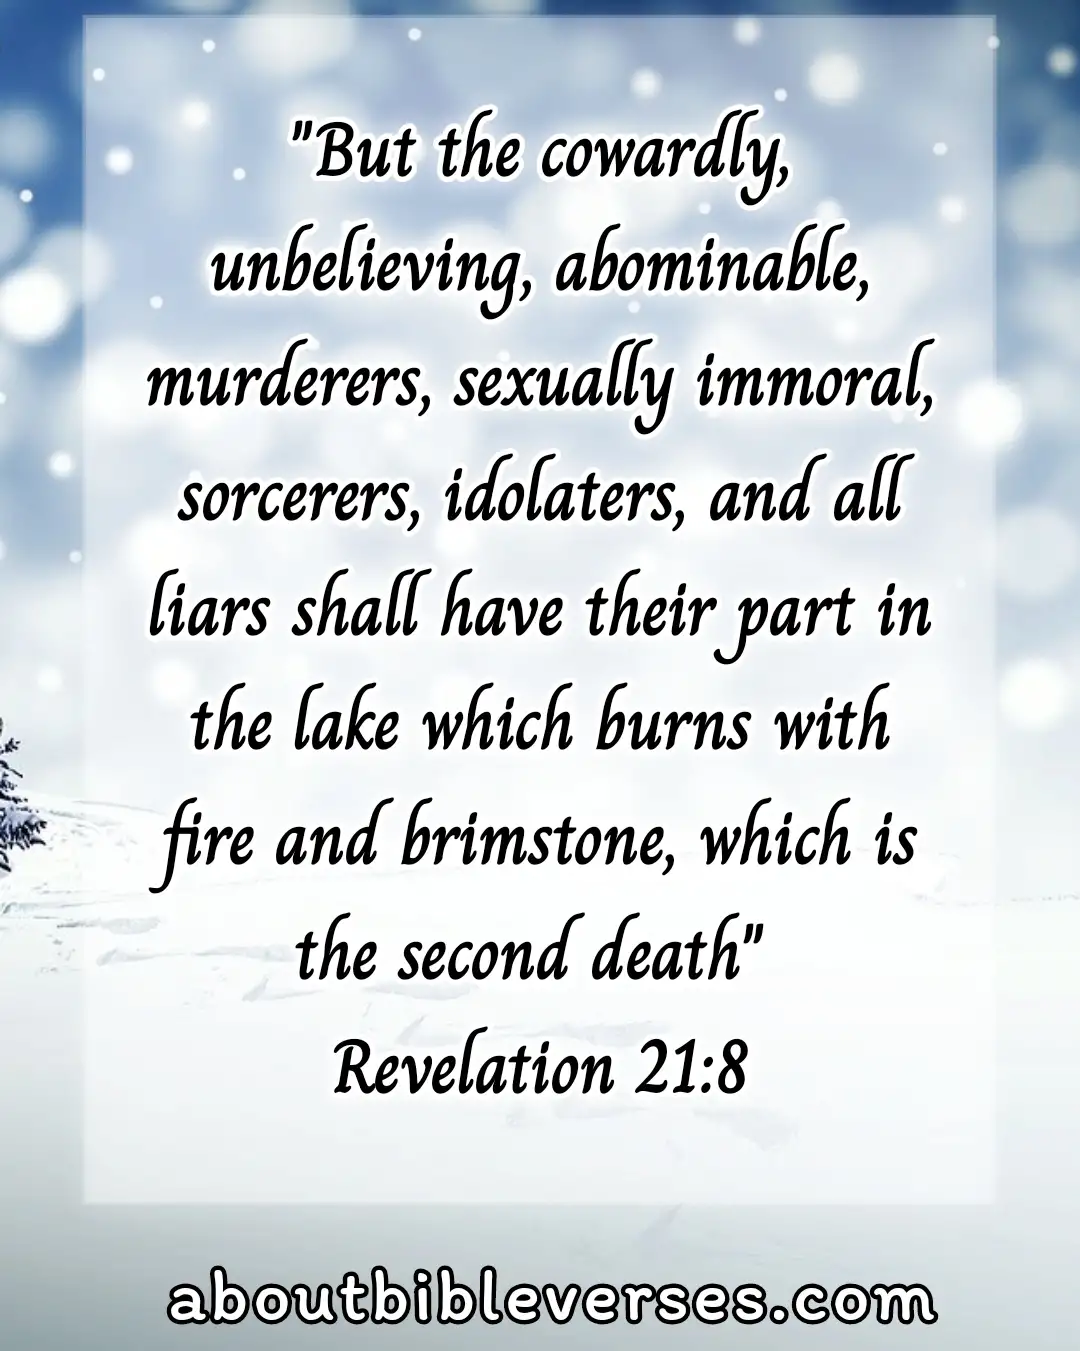 Bible Verse About Warning The Wicked And Sinners (Revelation 21:8)